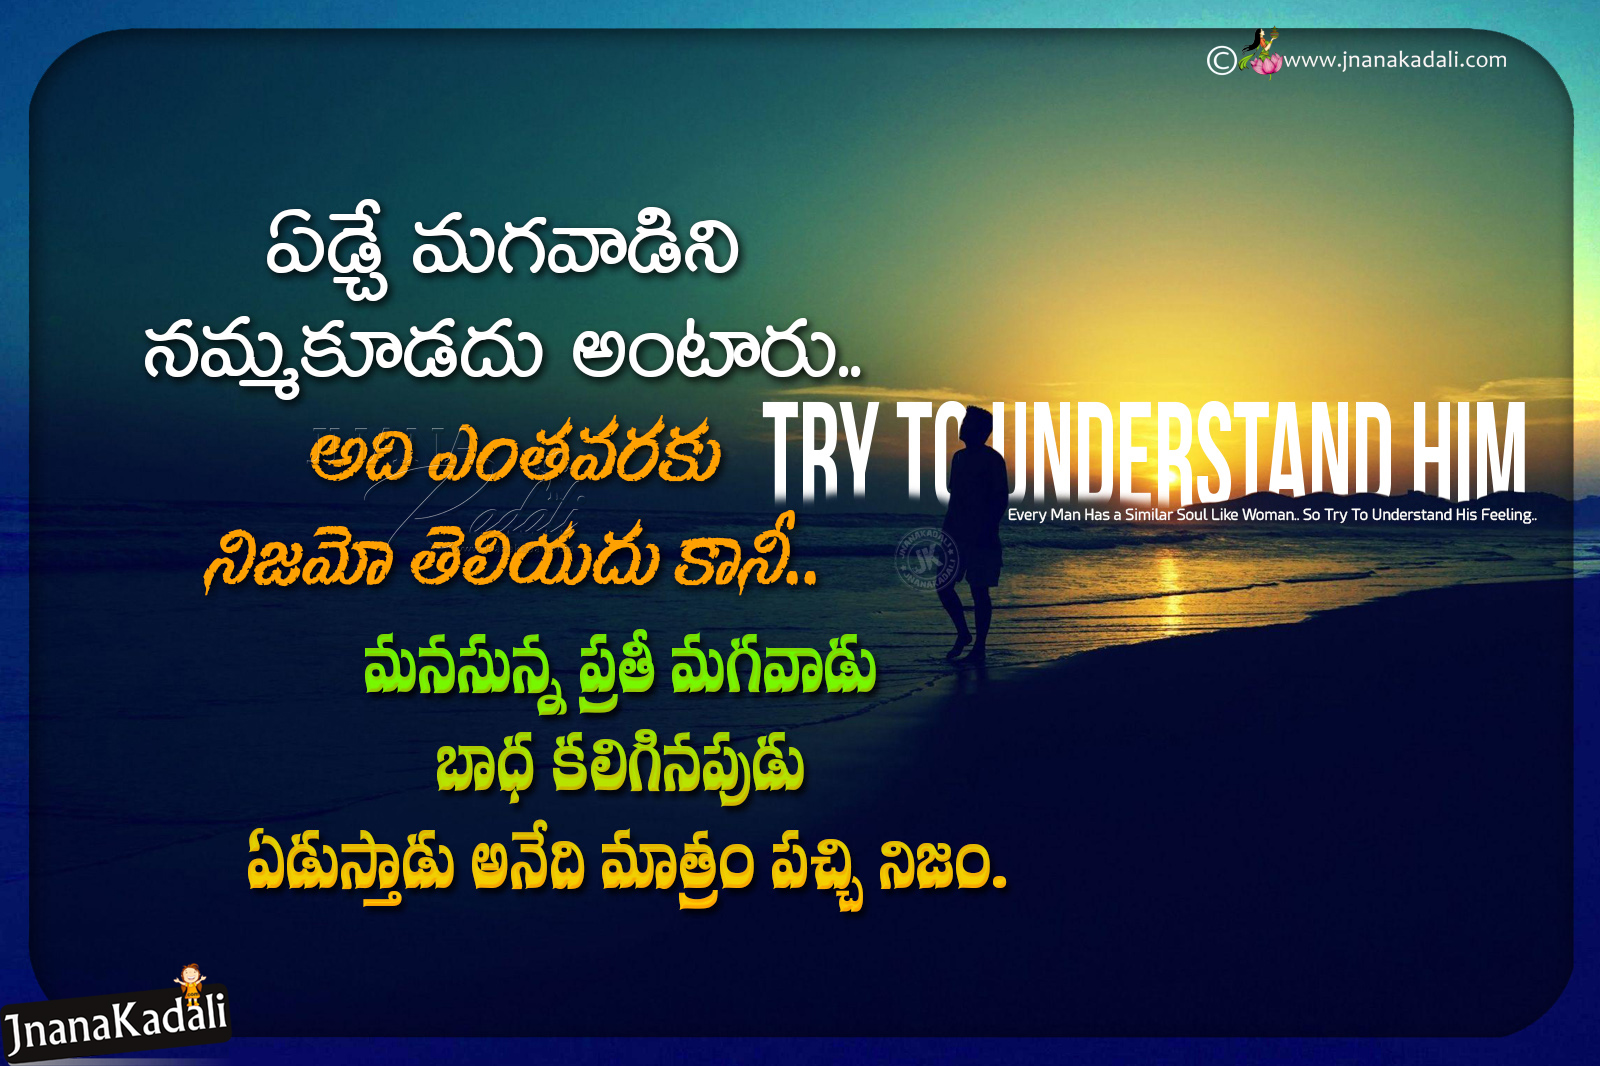 Heart Touching Quotes About Men Feeling Realistic Quotes On Alone Life In Telugu Jnana Kadali Com Telugu Quotes English Quotes Hindi Quotes Tamil Quotes Dharmasandehalu